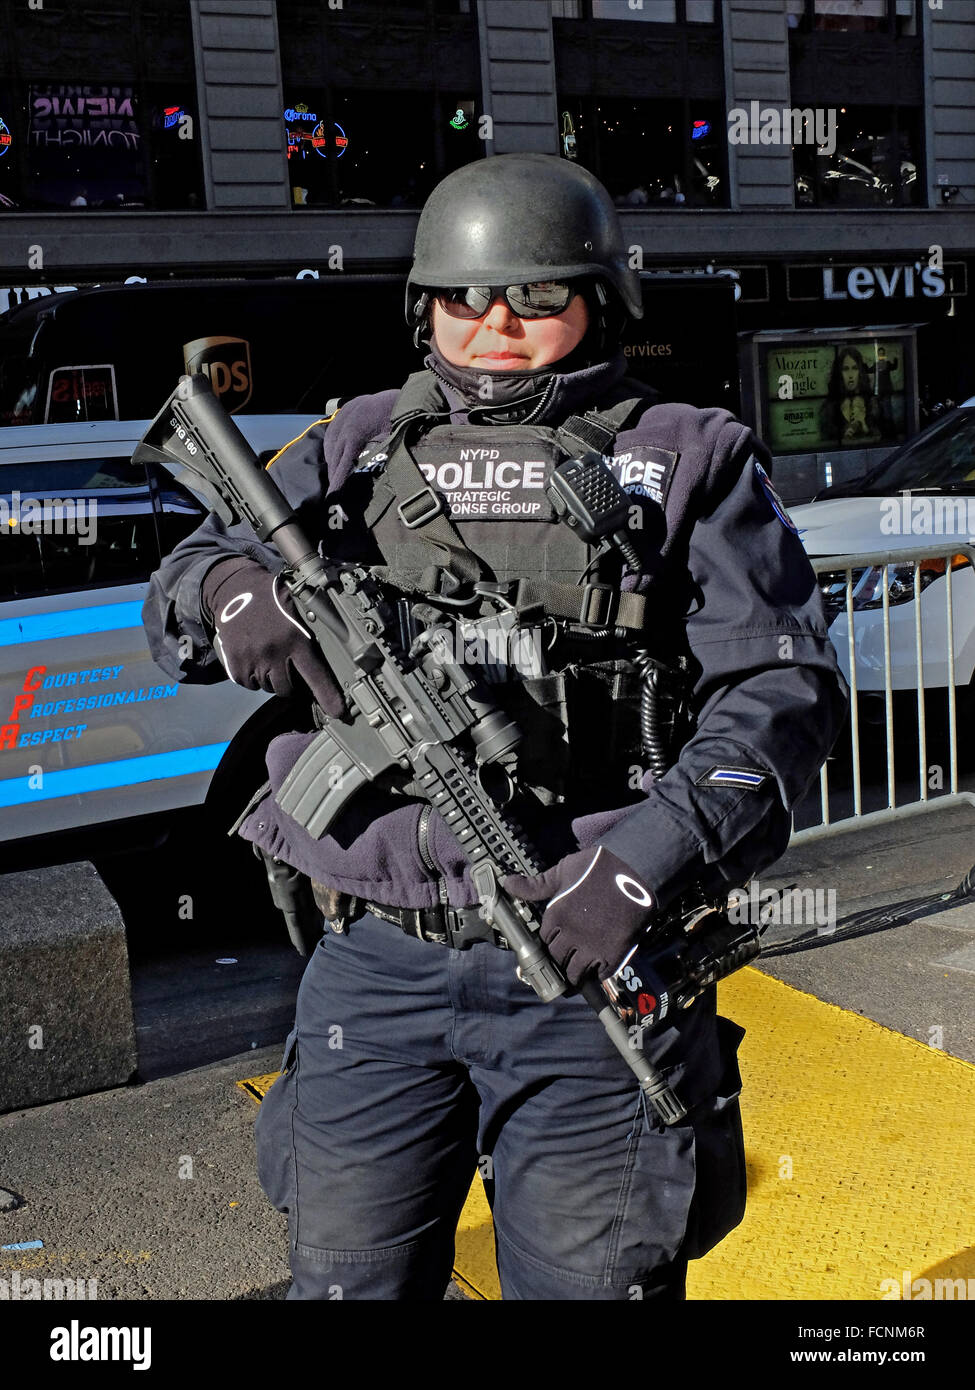 An armed woman New York City Police officer with a machine gun in Times Square, NYC Stock Photo